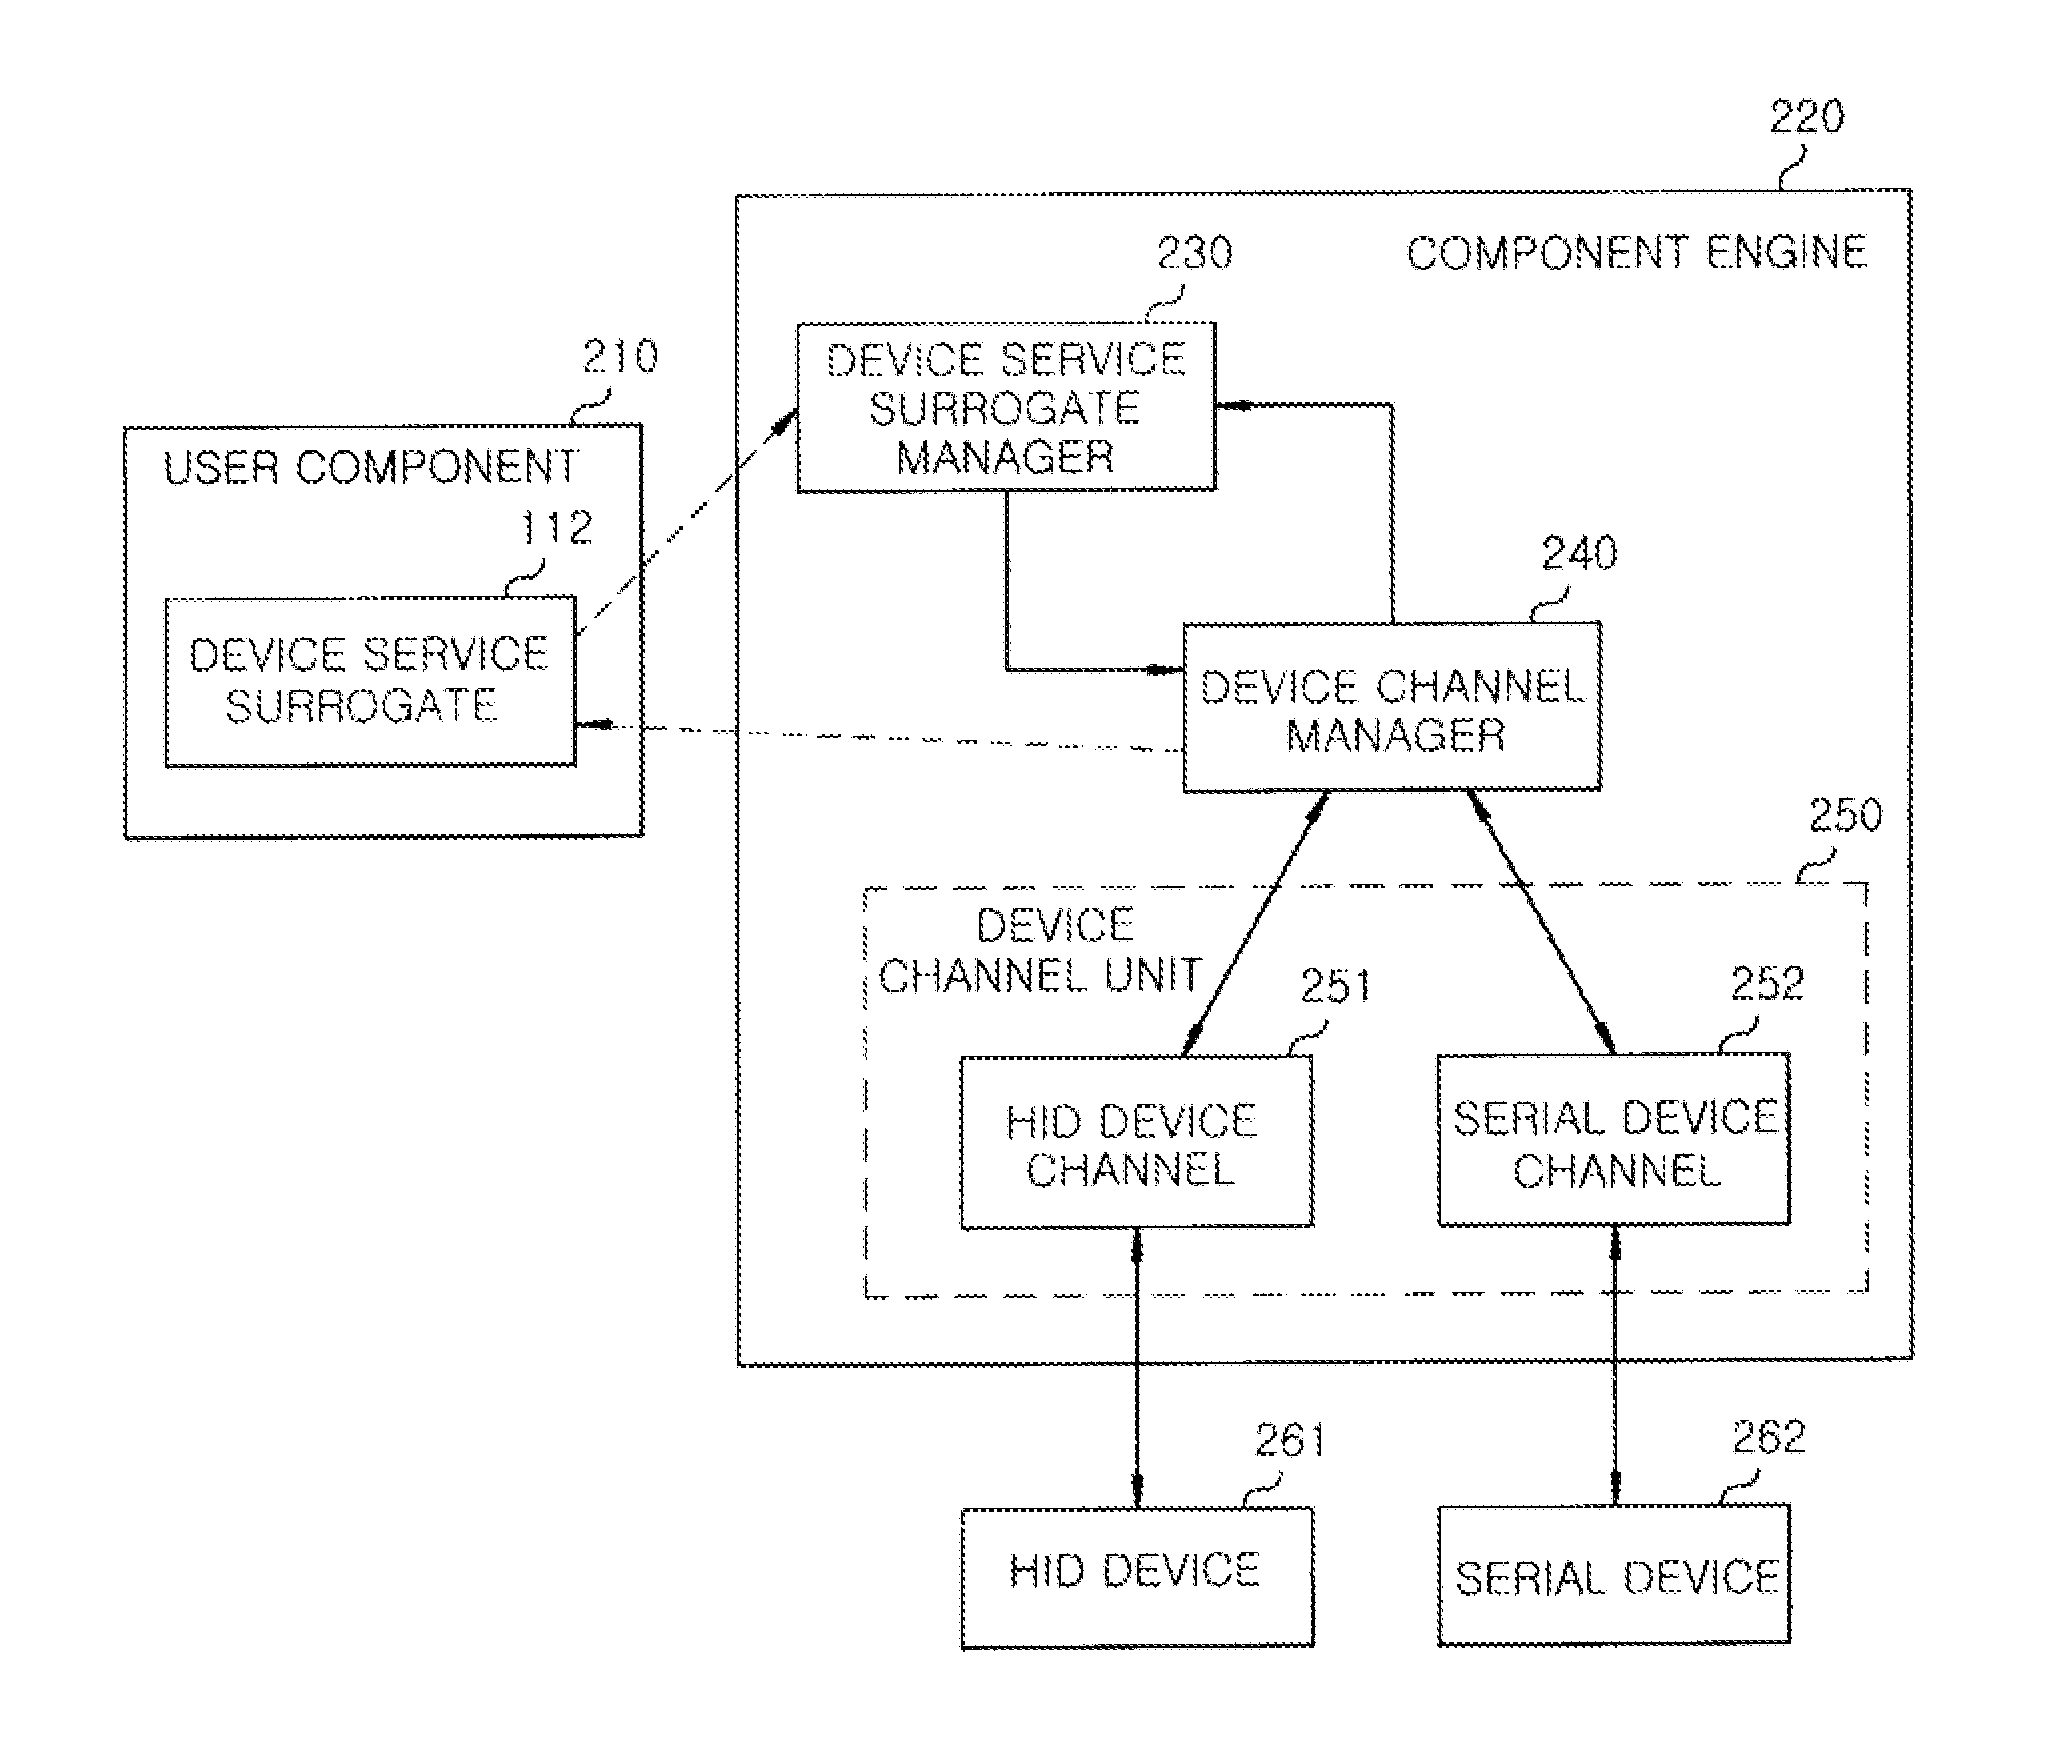 Apparatus and method for sharing device resources between robot software components